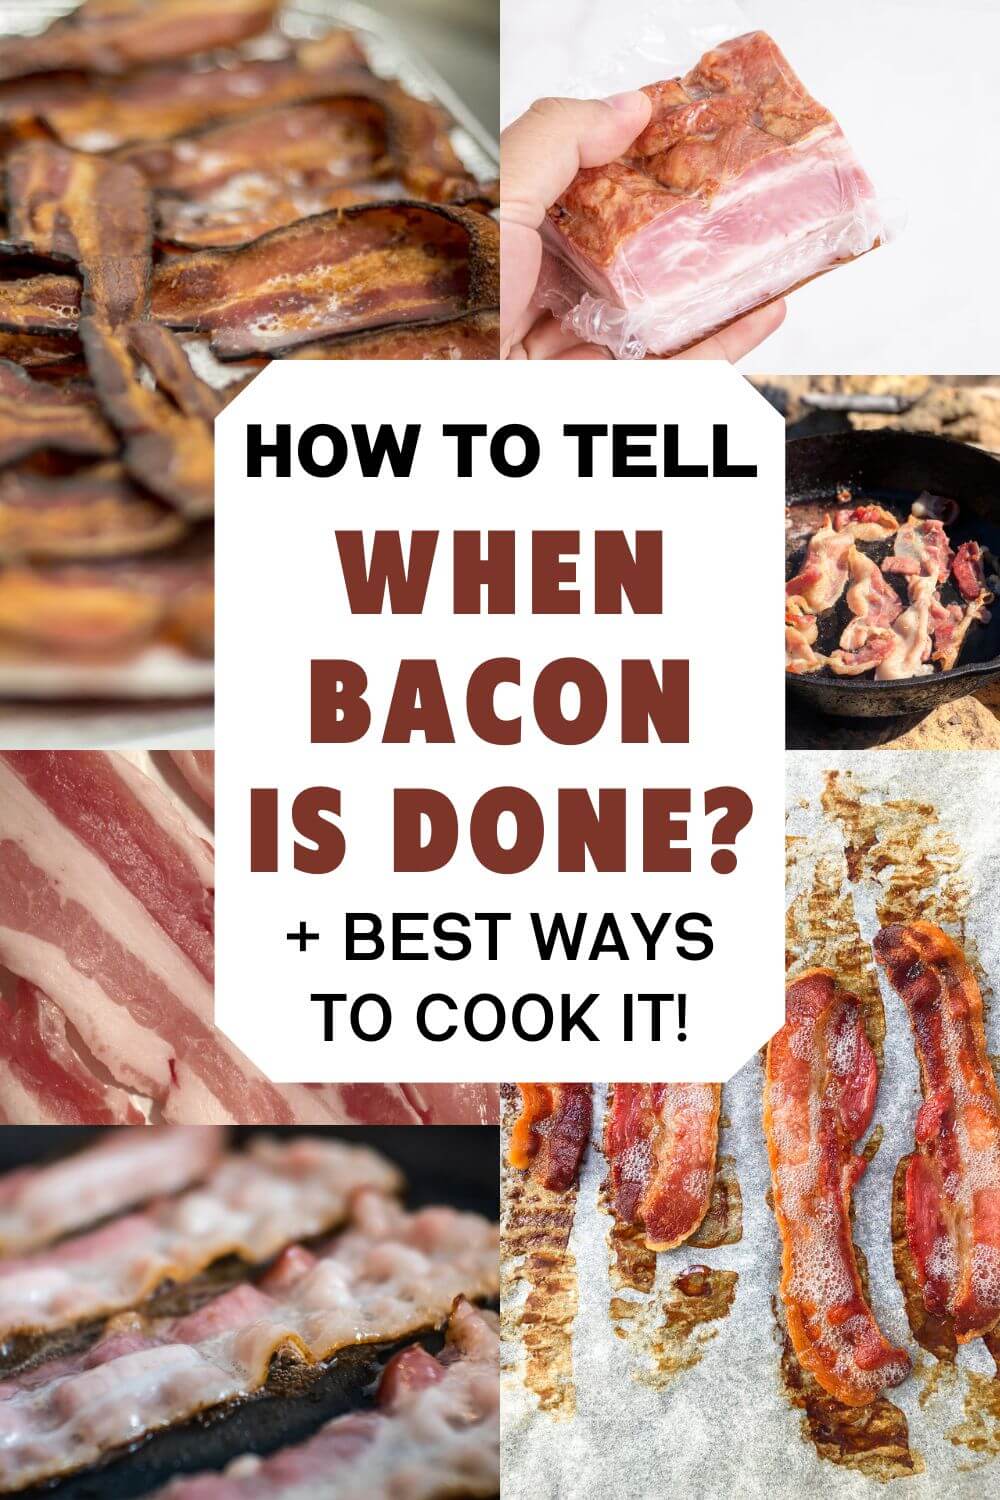 How To Tell When Bacon Is Done?